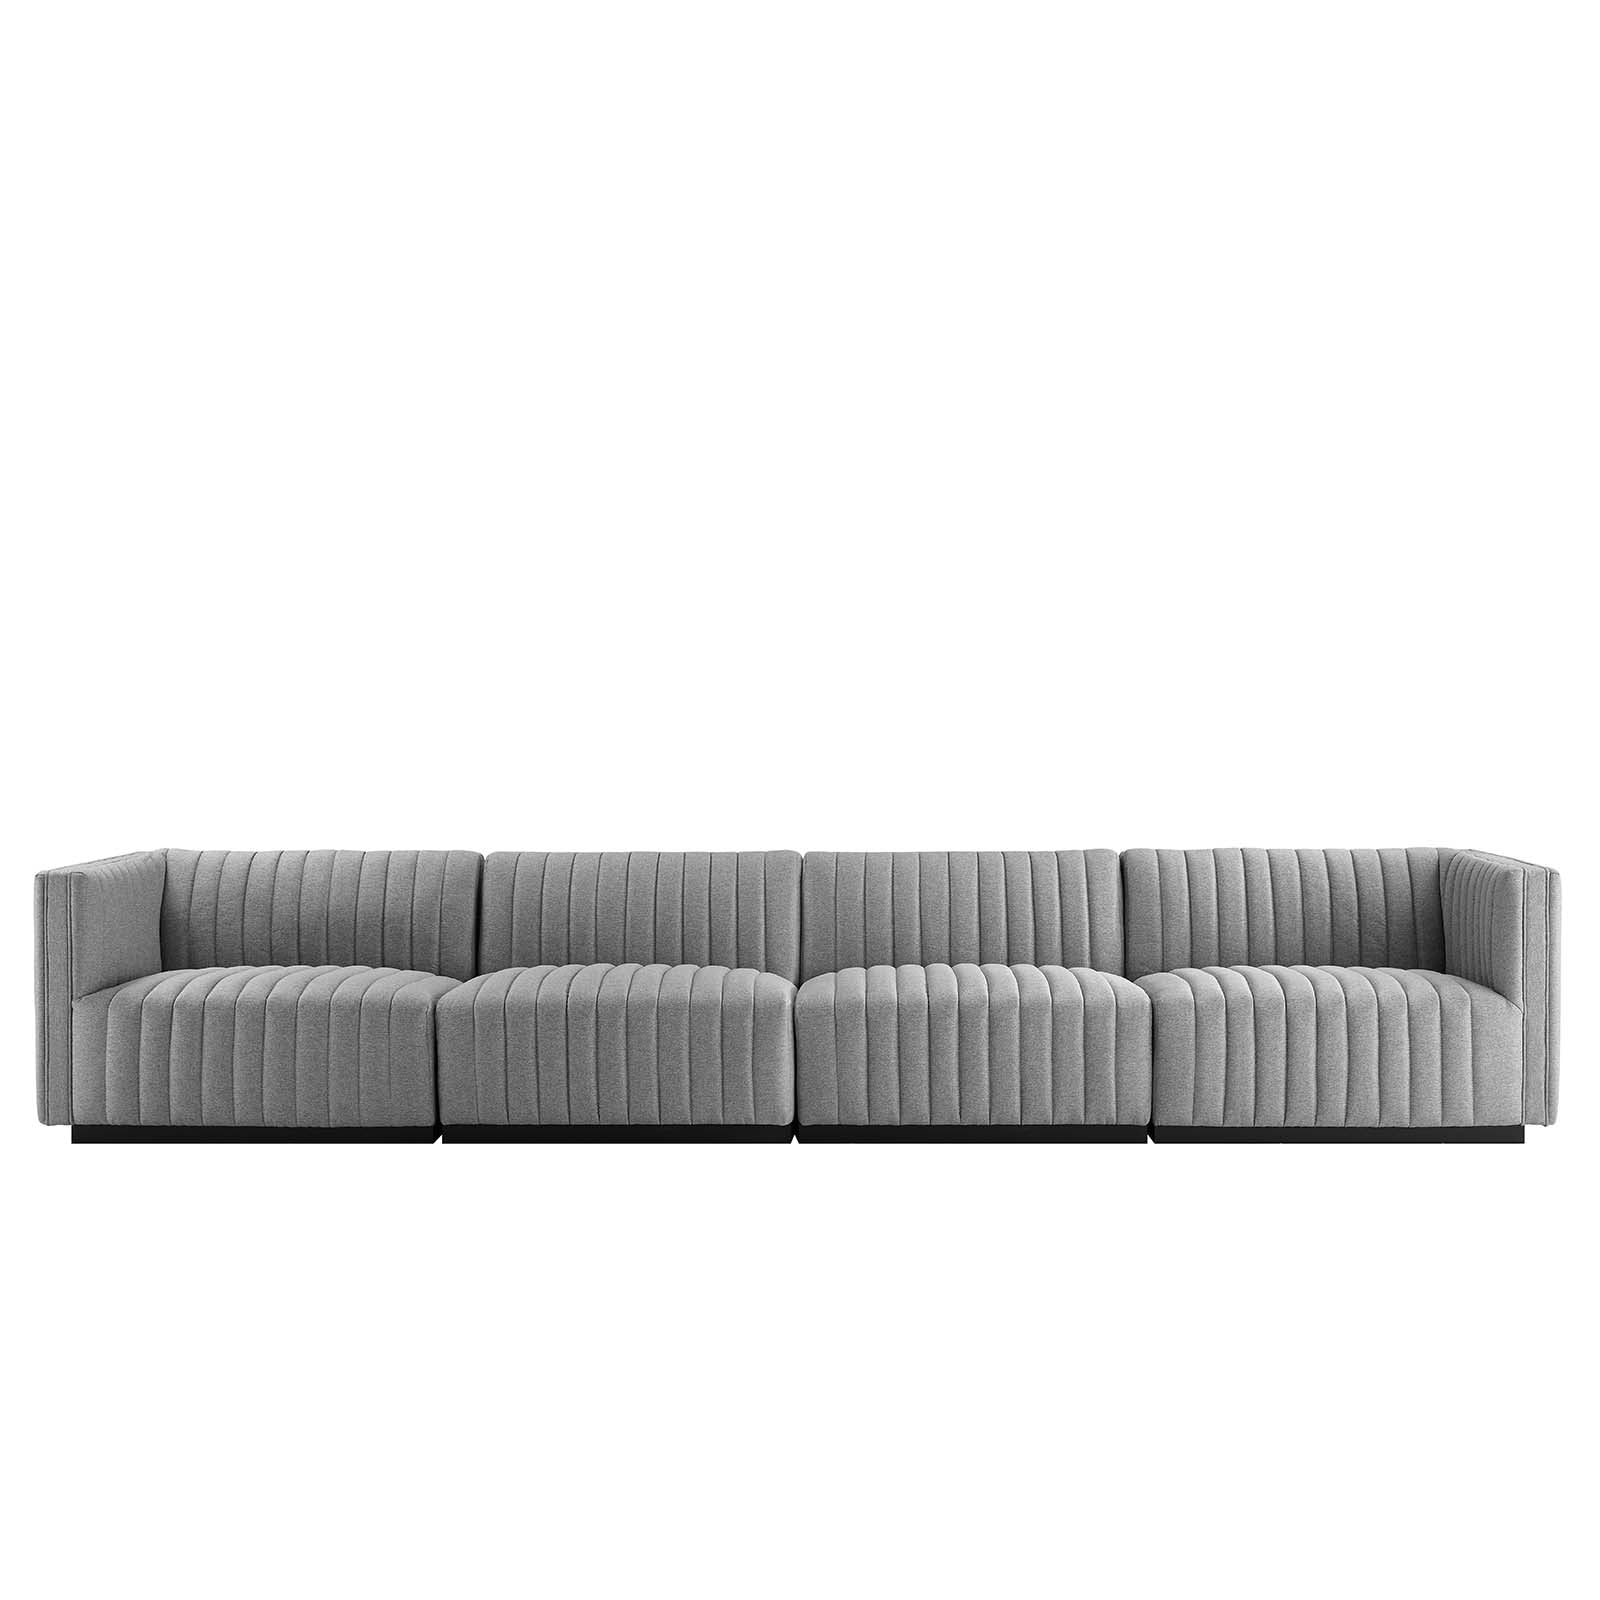 Conjure Channel Tufted Upholstered Fabric 4-Piece Sofa